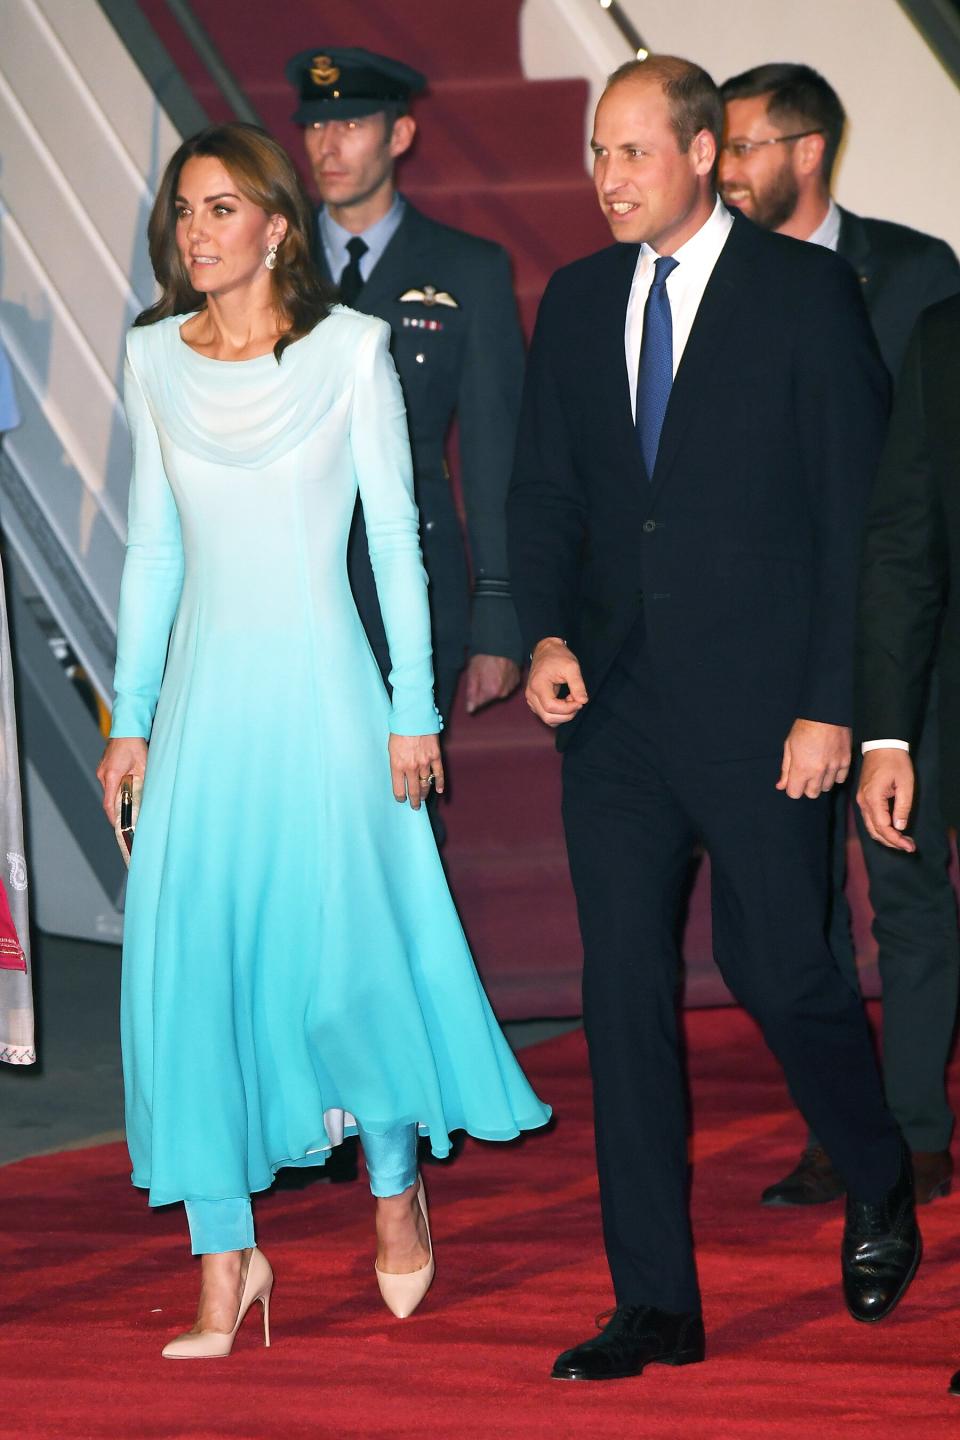 Kate Middleton and Prince William <a href="https://people.com/royals/kate-middleton-and-prince-william-touch-down-in-pakistan-for-the-start-of-their-royal-tour/" rel="nofollow noopener" target="_blank" data-ylk="slk:arrived in Pakistan to kick off their five day royal tour;elm:context_link;itc:0;sec:content-canvas" class="link ">arrived in Pakistan to kick off their five day royal tour</a>. Kate looked elegant in an aqua blue bespoke flowing top and fitted pants by Catherine Walker, which she paired with nude pumps and a matching clutch. <strong>Get the Look!</strong> Ibtom Castle Evening Long Maxi Gradient Ombre Dress, $11.85–$30.25; <a href="https://www.amazon.com/Infinity-Gradient-Convertible-Multi-Way-Elasticity/dp/B07L4459WV/ref=as_li_ss_tl?dchild=1&keywords=blue+ombre+maxi+dress+women&qid=1571080059&sr=8-2&linkCode=ll1&tag=poamzfkatemiddletonfallstylekphillips1019-20&linkId=63dc0eb66f96f91ea52fecd706919908&language=en_US" rel="nofollow noopener" target="_blank" data-ylk="slk:amazon.com;elm:context_link;itc:0;sec:content-canvas" class="link ">amazon.com</a> Alice + Olivia Joleen Pleated Midi Dress, $485; <a href="https://click.linksynergy.com/deeplink?id=93xLBvPhAeE&mid=13867&murl=https%3A%2F%2Fwww.bloomingdales.com%2Fshop%2Fproduct%2Falice-olivia-joleen-pleated-midi-dress%3FID%3D3434139&u1=PEO%2CShopping%3AEverythingYouNeedtoCopyKateMiddleton%E2%80%99sChicWinterStyle%2Ckamiphillips2%2CUnc%2CGal%2C7360903%2C202002%2CI" rel="nofollow noopener" target="_blank" data-ylk="slk:bloomingdales.com;elm:context_link;itc:0;sec:content-canvas" class="link ">bloomingdales.com</a> Porridge Marcienne Maxi Dress, $180; <a href="https://click.linksynergy.com/deeplink?id=93xLBvPhAeE&mid=39789&murl=https%3A%2F%2Fwww.anthropologie.com%2Fshop%2Fmarcienne-maxi-dress&u1=PEO%2CShopping%3AEverythingYouNeedtoCopyKateMiddleton%E2%80%99sChicWinterStyle%2Ckamiphillips2%2CUnc%2CGal%2C7360903%2C202002%2CI" rel="nofollow noopener" target="_blank" data-ylk="slk:anthropologie.com;elm:context_link;itc:0;sec:content-canvas" class="link ">anthropologie.com</a> Rachel Parcell Tiered Long Sleeve Maxi Dress, $83.40 (orig. $139); <a href="https://click.linksynergy.com/deeplink?id=93xLBvPhAeE&mid=1237&murl=https%3A%2F%2Fshop.nordstrom.com%2Fs%2Frachel-parcell-tiered-long-sleeve-maxi-dress-nordstrom-exclusive%2F5227519&u1=PEO%2CShopping%3AEverythingYouNeedtoCopyKateMiddleton%E2%80%99sChicWinterStyle%2Ckamiphillips2%2CUnc%2CGal%2C7360903%2C202002%2CI" rel="nofollow noopener" target="_blank" data-ylk="slk:nordstrom.com;elm:context_link;itc:0;sec:content-canvas" class="link ">nordstrom.com</a>